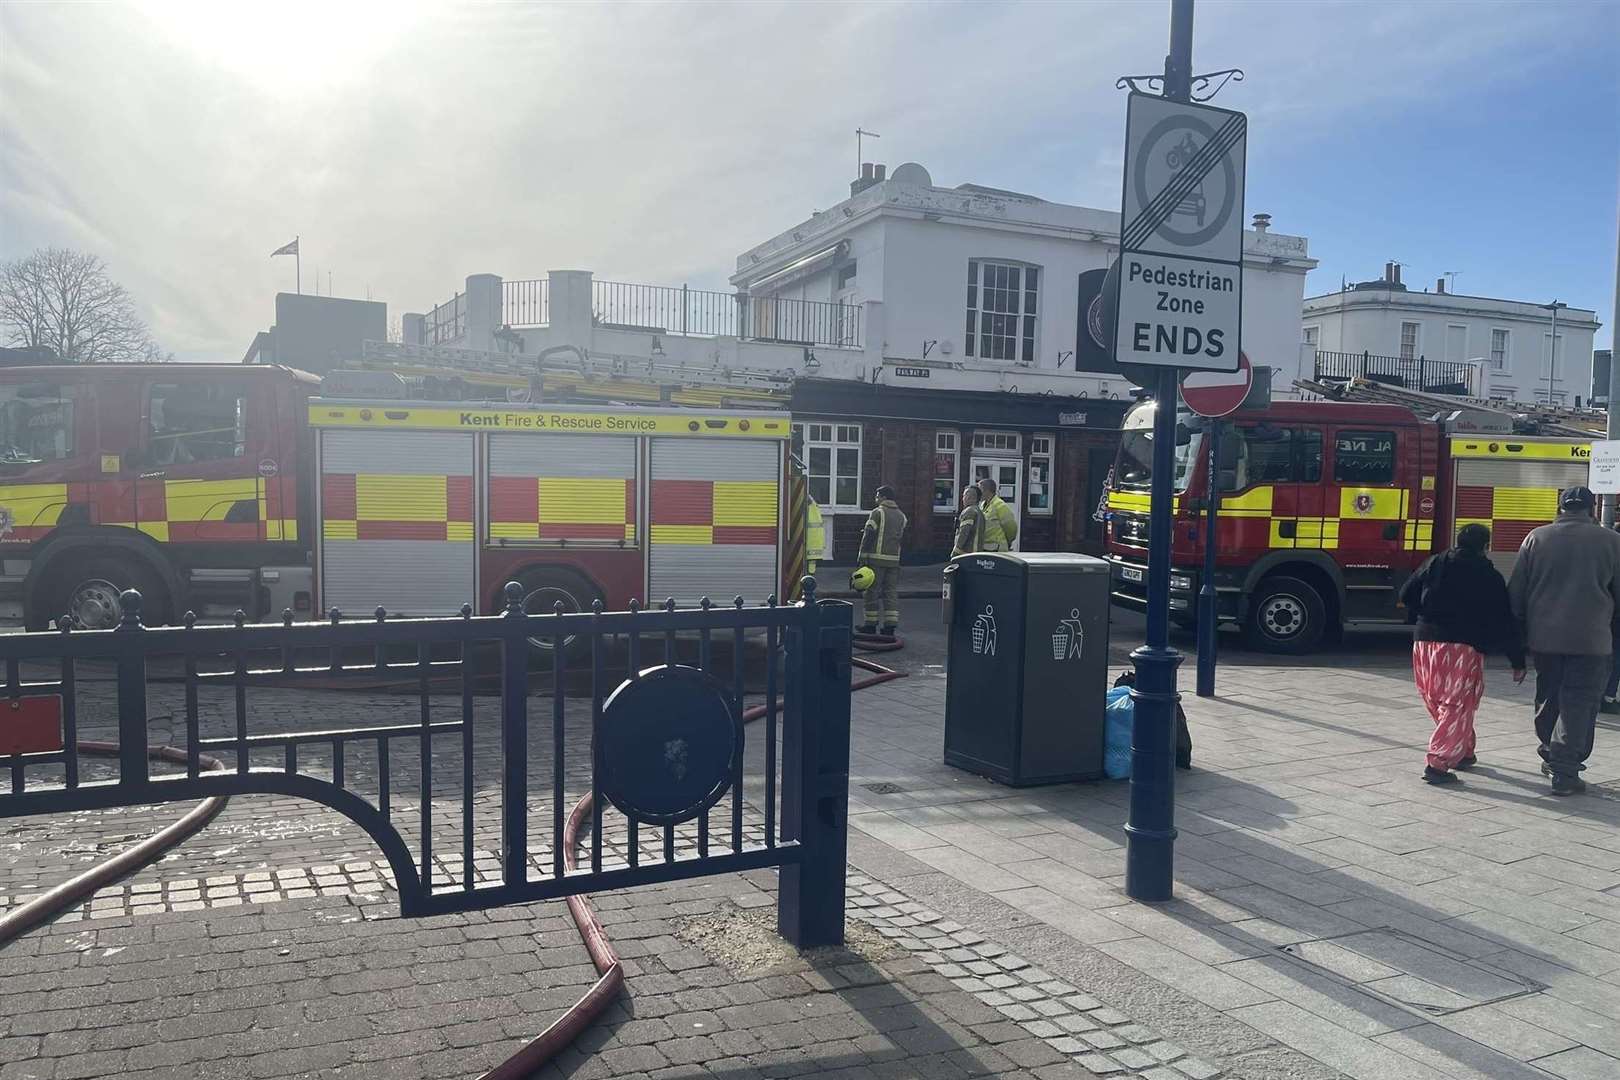 Fire engines seen in Gravesend